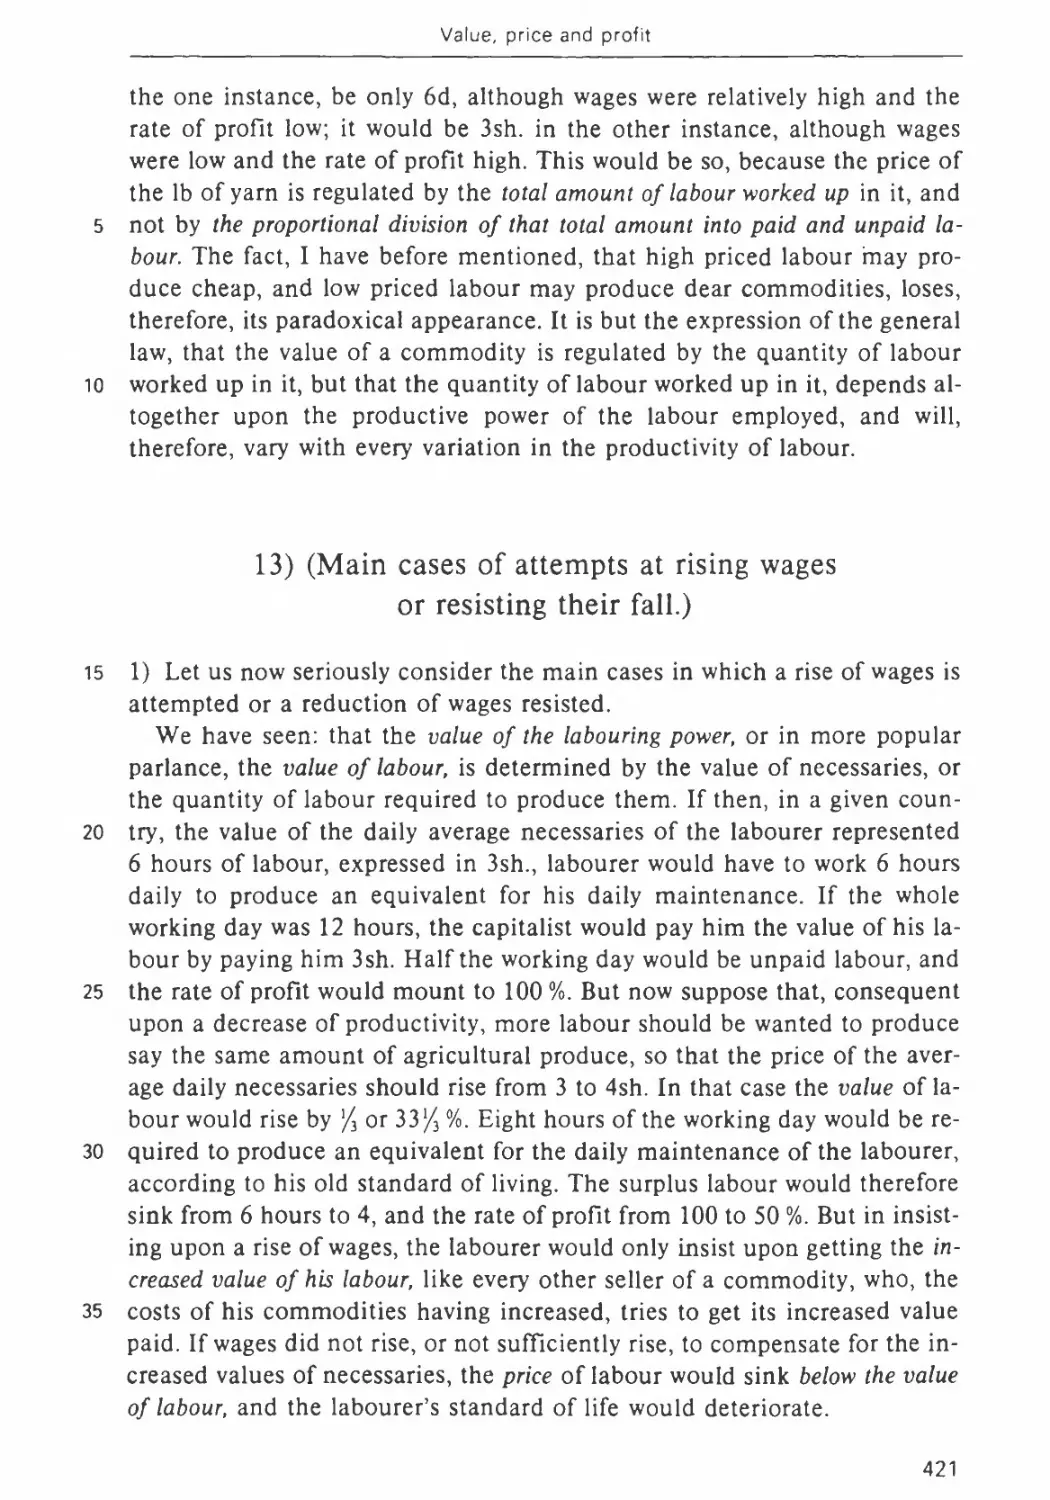 13. Main cases of attempts at rising wages or resisting their fall